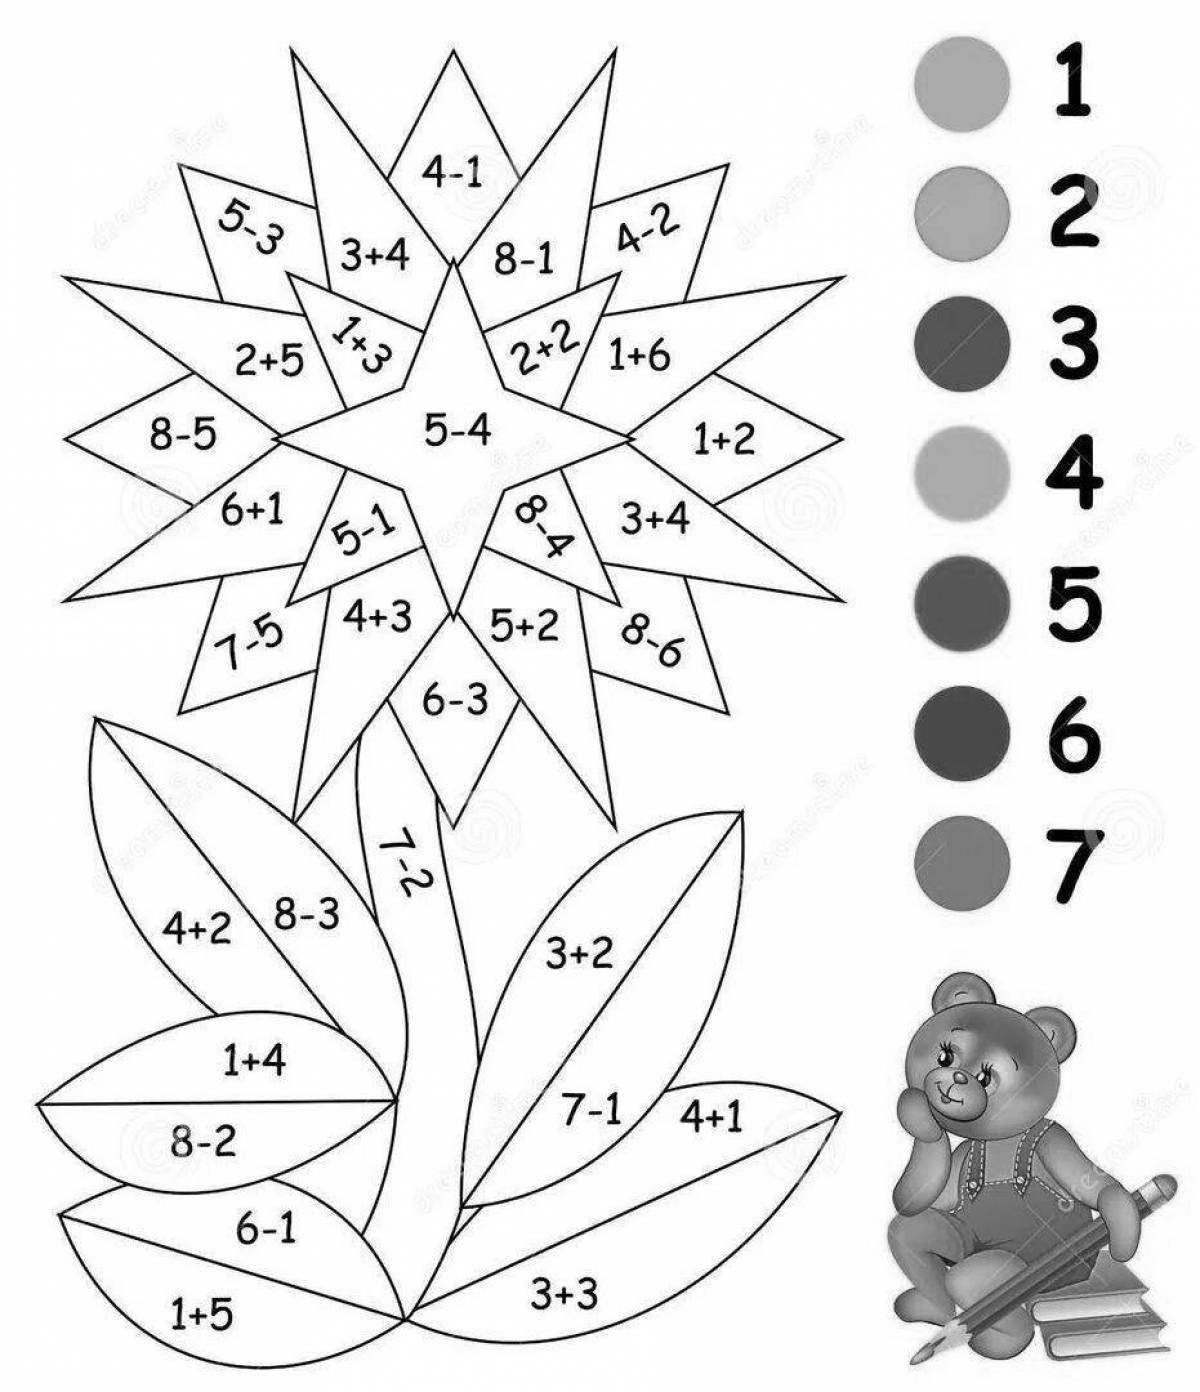 Relaxing math coloring book for kids 6-7 years old